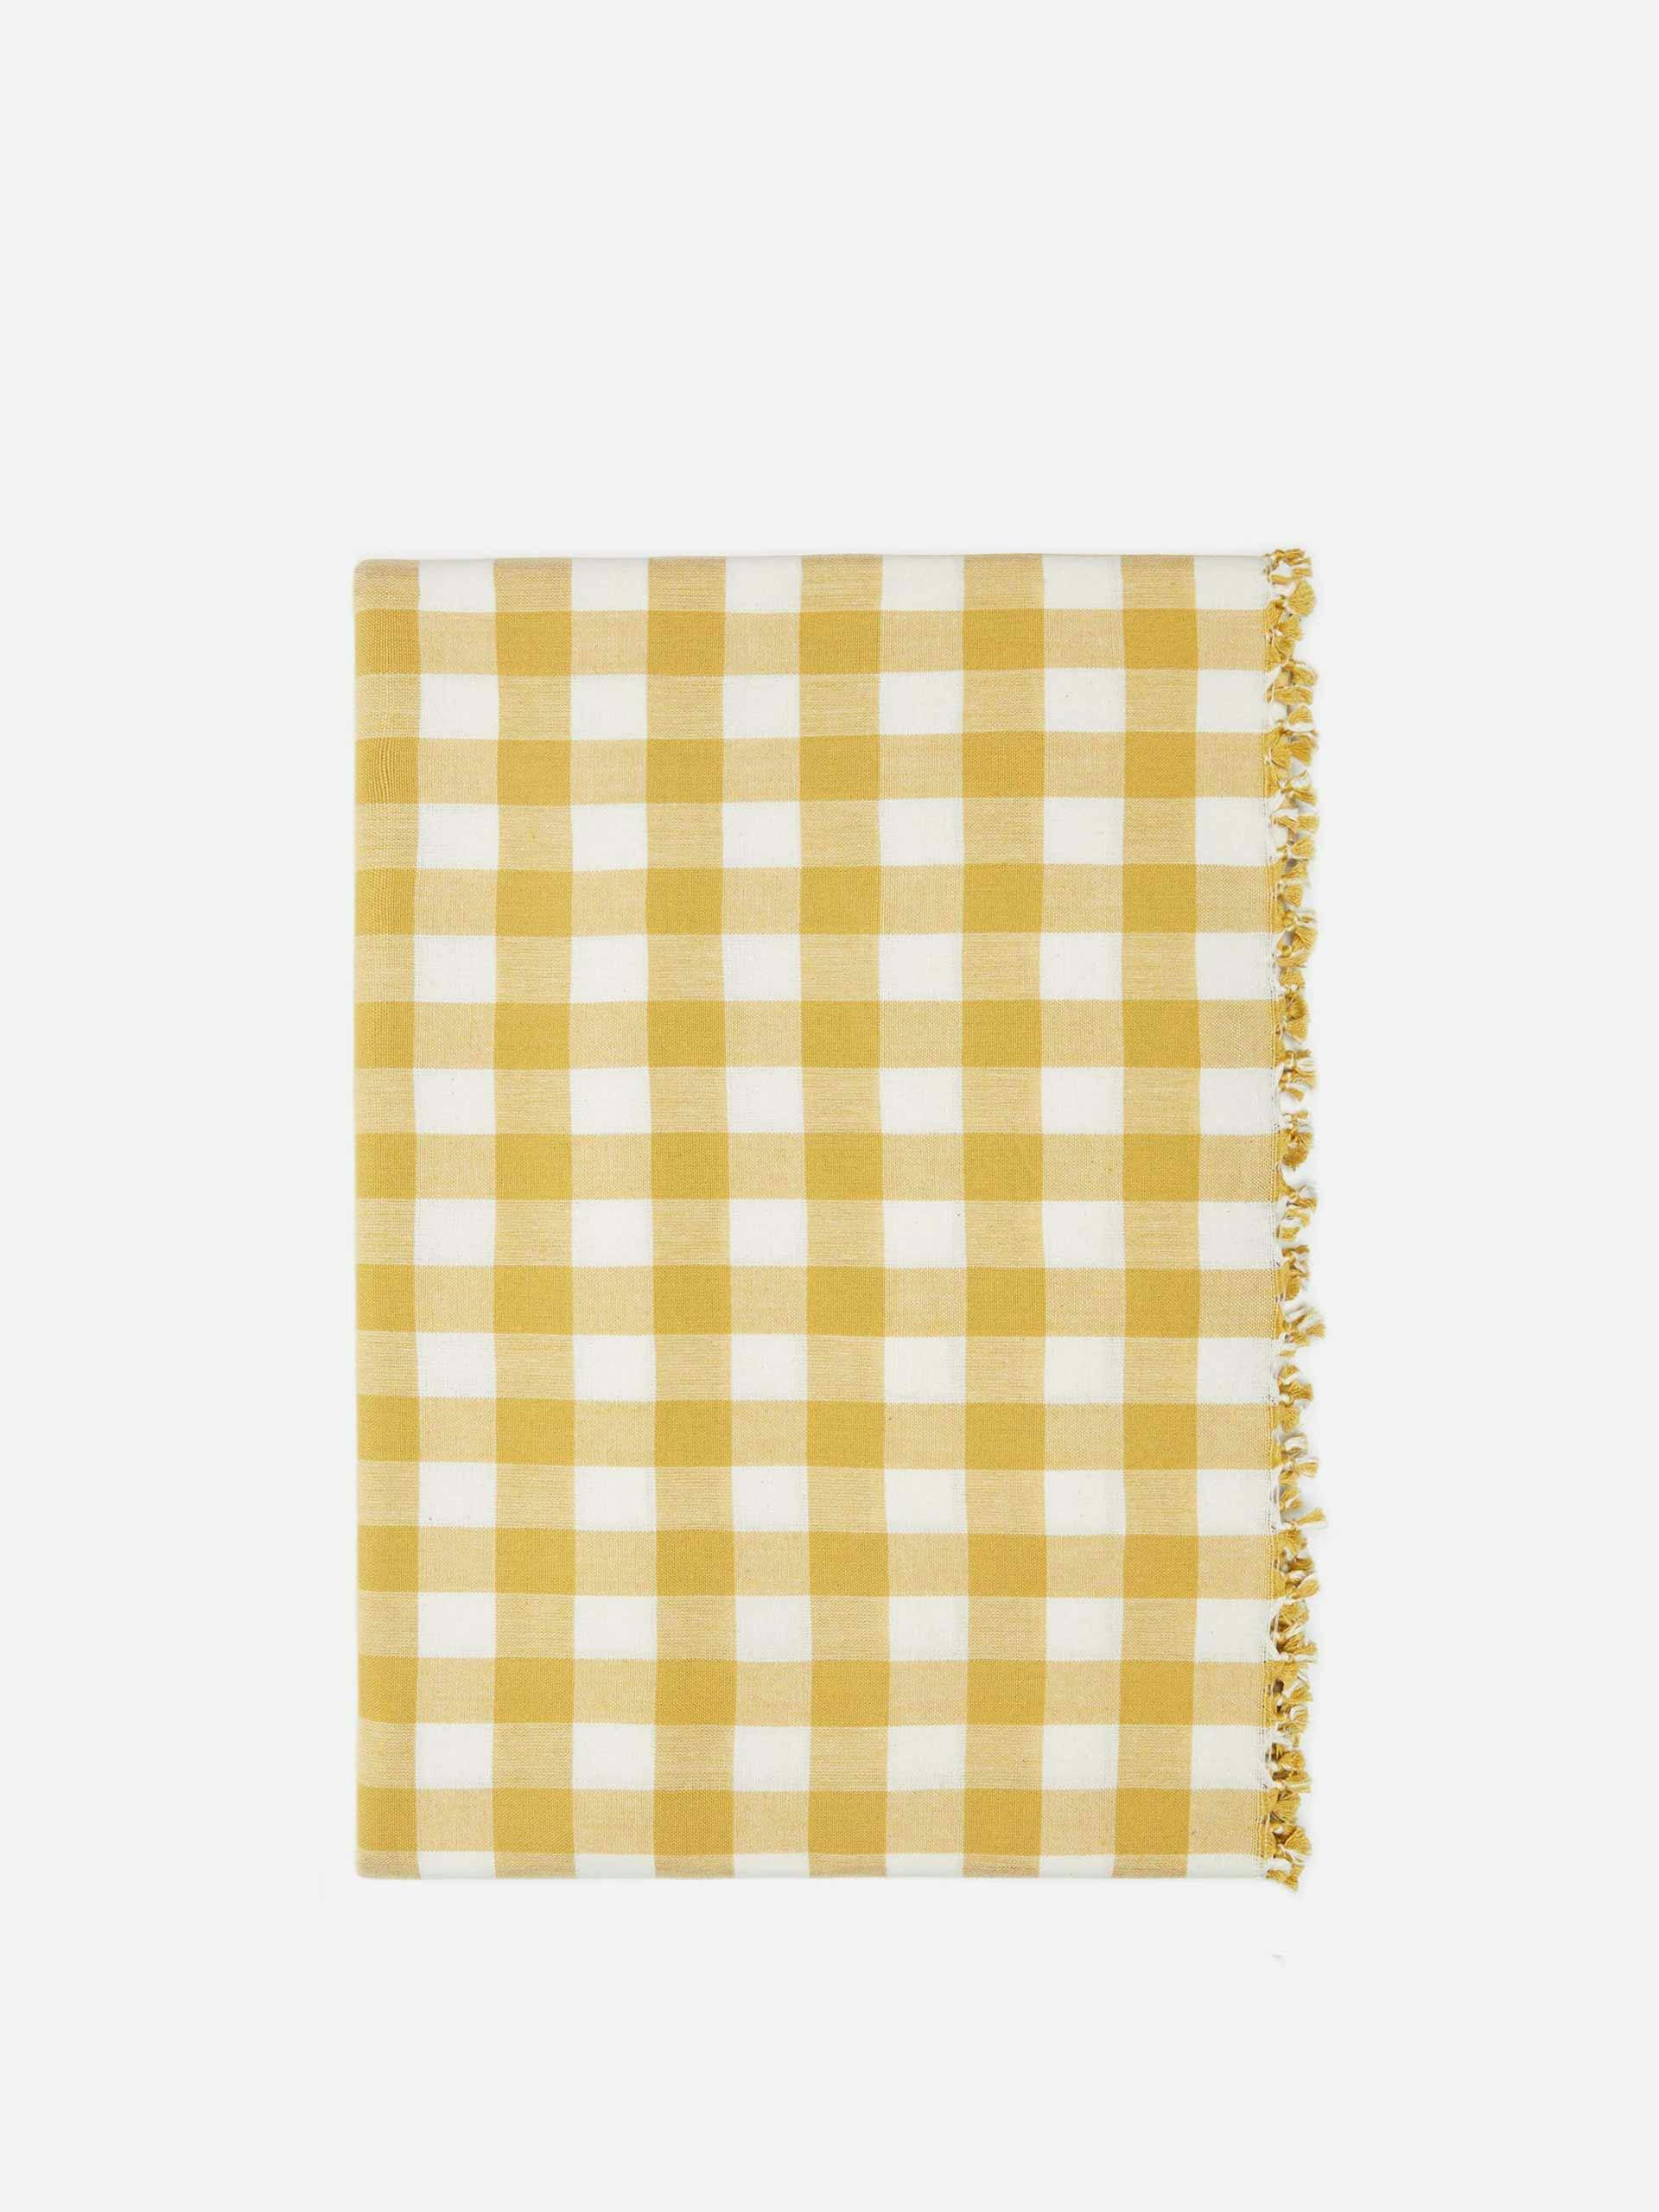 Yellow gingham tablecloth